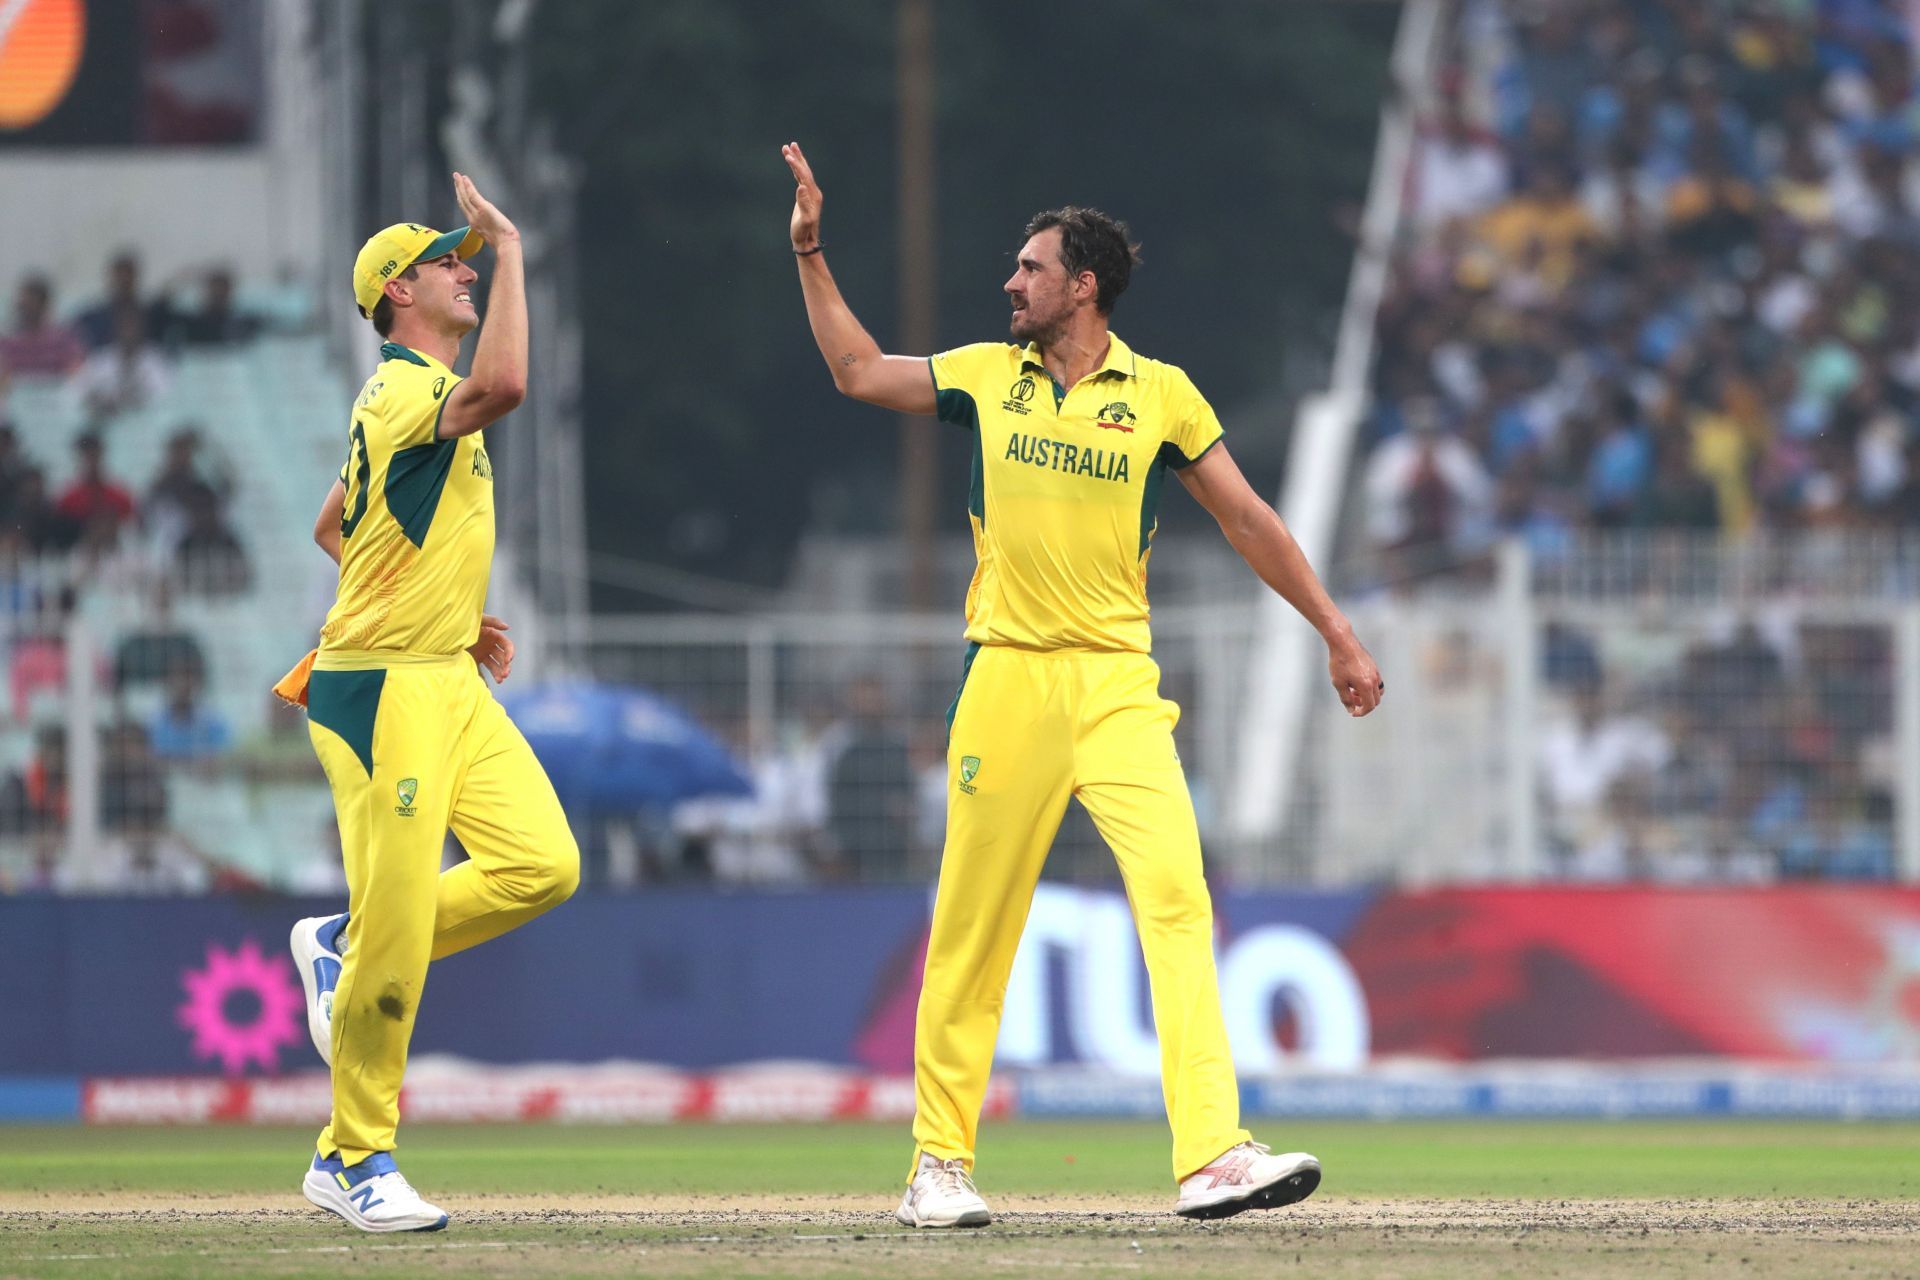 Mitchell Starc lifted his game in the World Cup knockouts. (Pic: Getty Images)